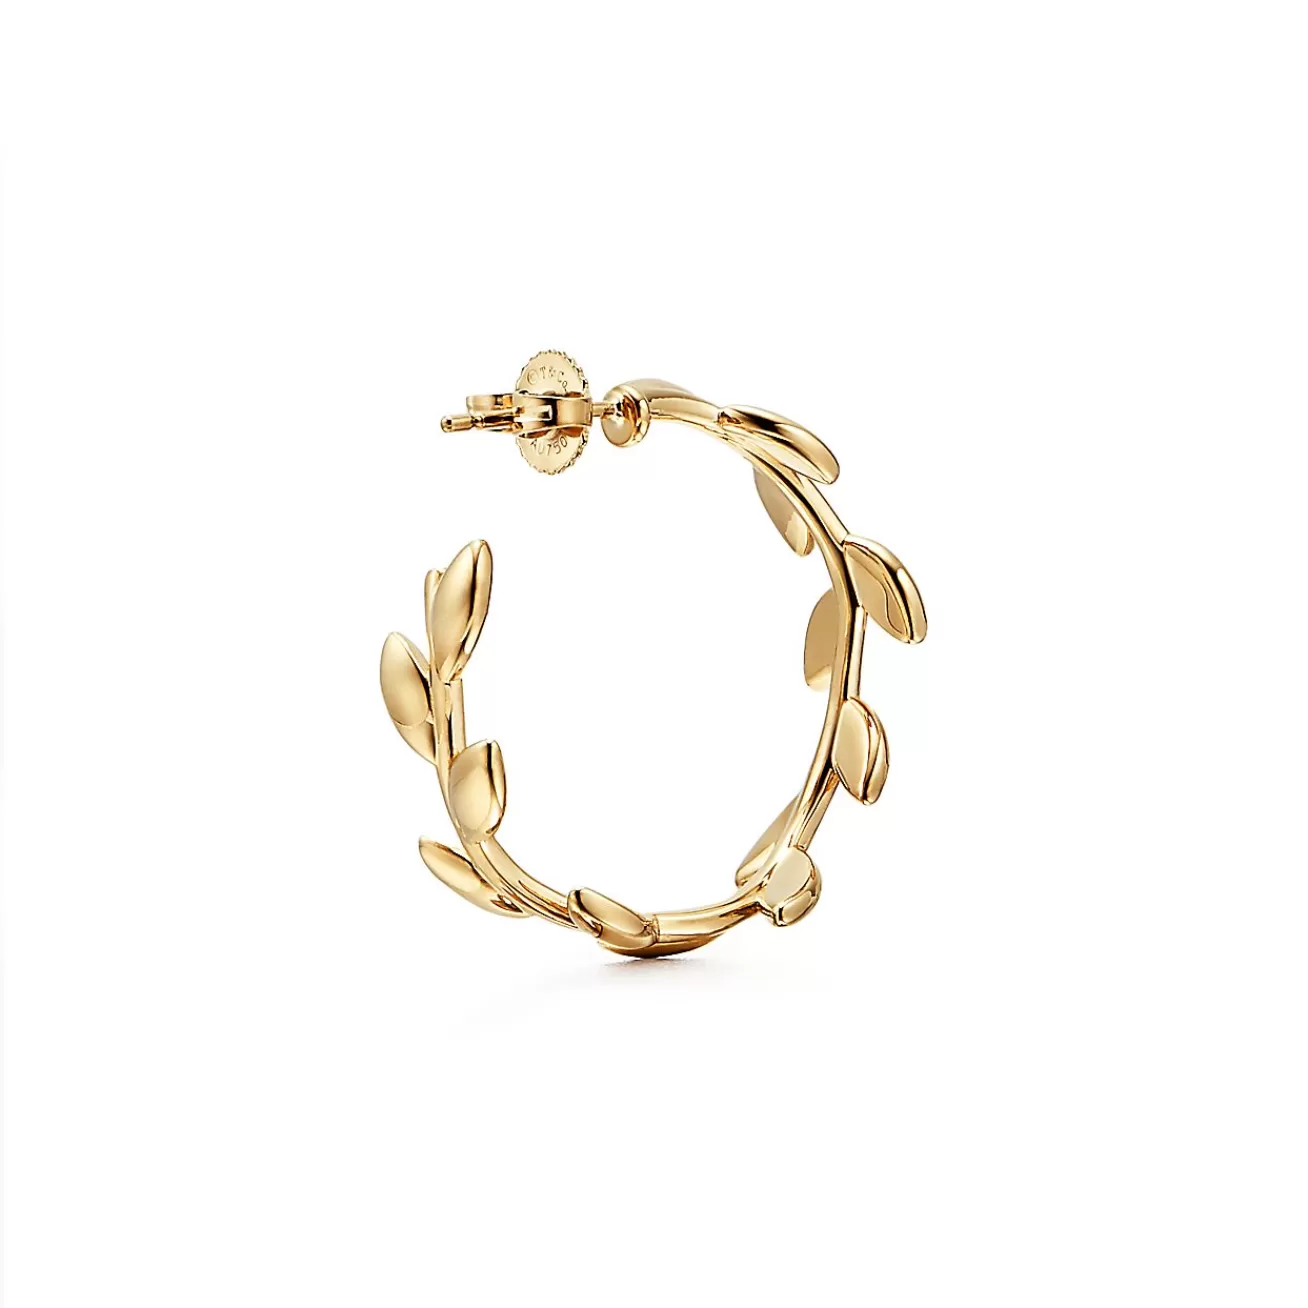 Tiffany & Co. Paloma Picasso® Olive Leaf hoop earrings in 18k gold. | ^ Earrings | Gifts for Her